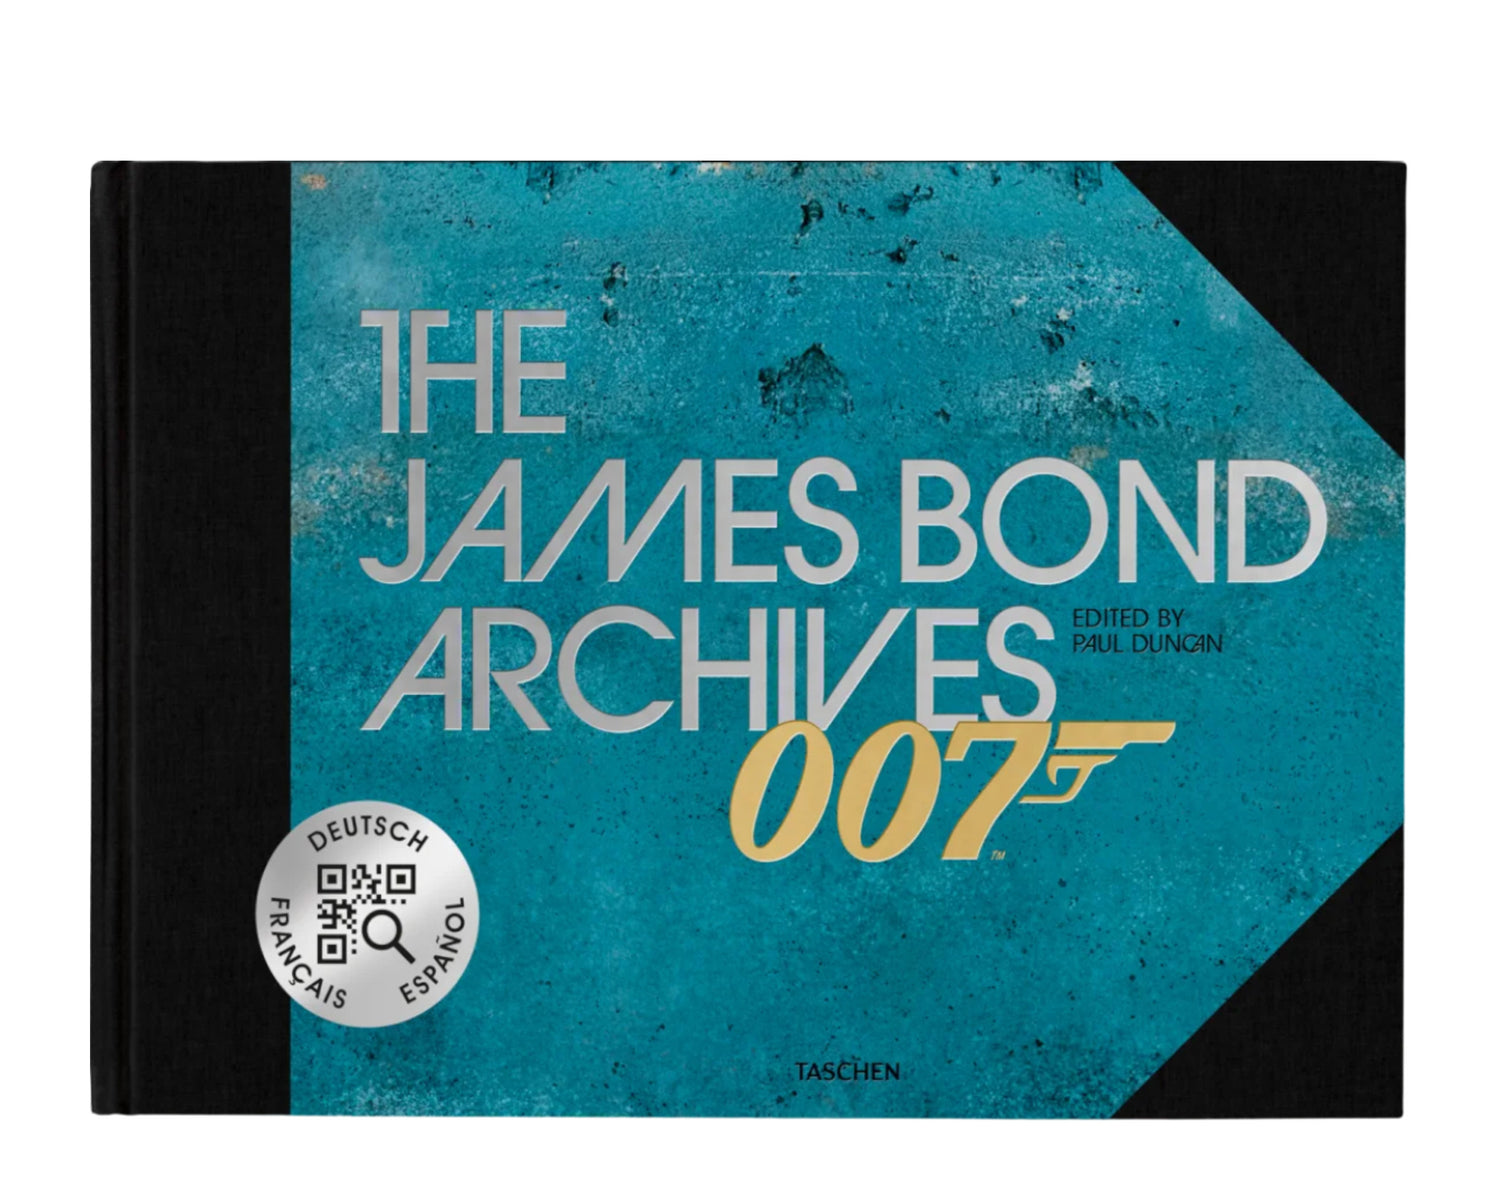 Taschen Books - The James Bond Archives. “No Time To Die” Edition Hardcover Book